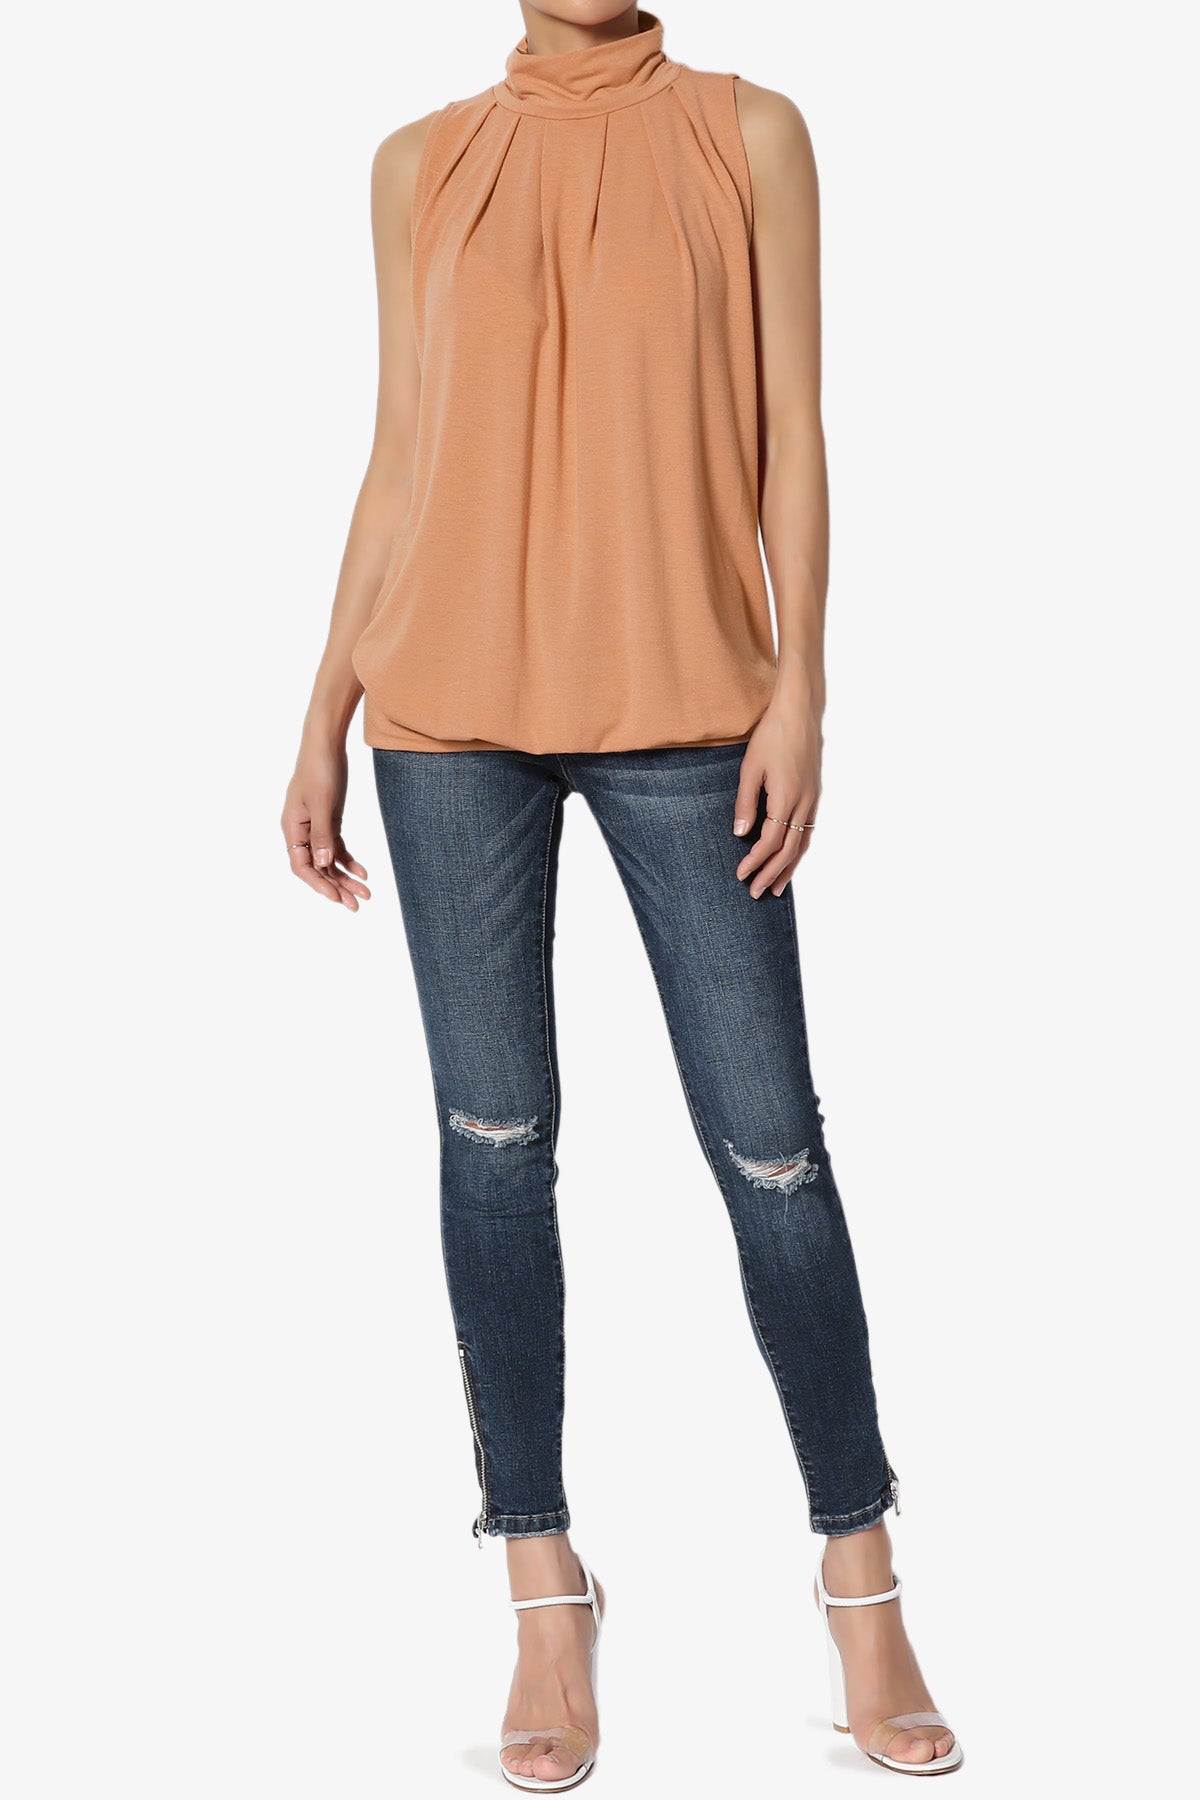 Load image into Gallery viewer, Jibbitz Sleeveless Mock Neck Pleated Top BUTTER ORANGE_6
